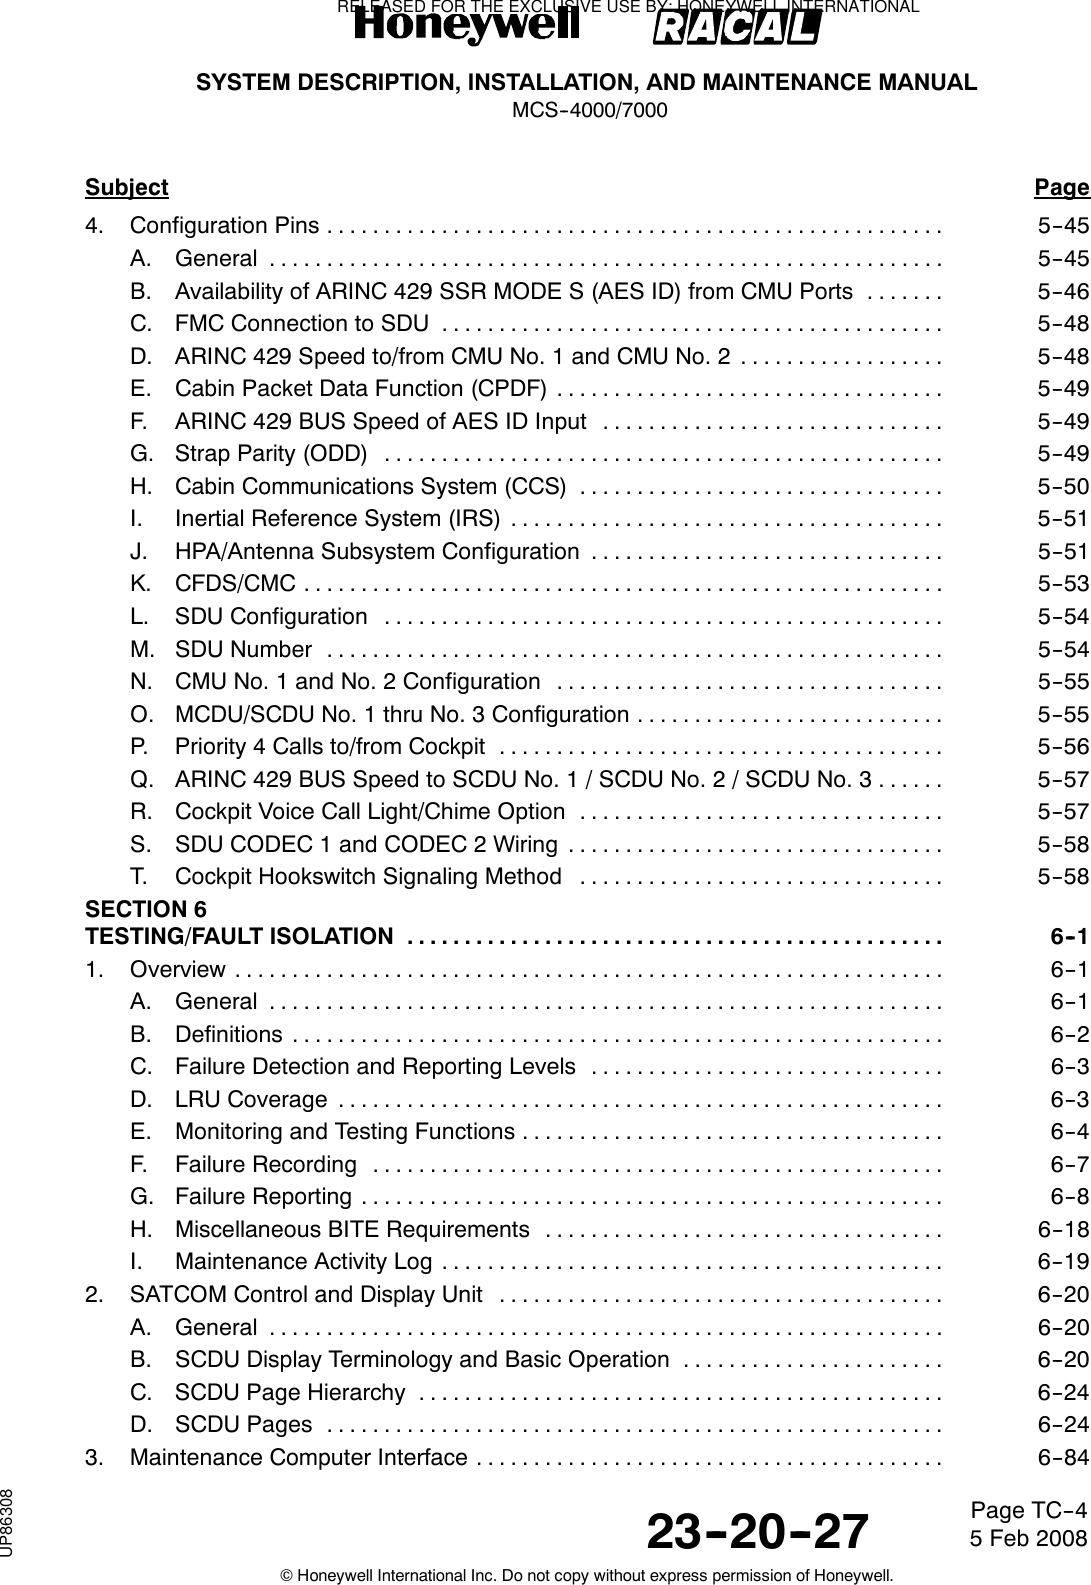 SYSTEM DESCRIPTION, INSTALLATION, AND MAINTENANCE MANUALMCS--4000/700023--20--27 5 Feb 2008©Honeywell International Inc. Do not copy without express permission of Honeywell.Page TC--4Subject Page4. Configuration Pins 5--45......................................................A. General 5--45...........................................................B. Availability of ARINC 429 SSR MODE S (AES ID) from CMU Ports 5--46.......C. FMC Connection to SDU 5--48............................................D. ARINC 429 Speed to/from CMU No. 1 and CMU No. 2 5--48..................E. Cabin Packet Data Function (CPDF) 5--49..................................F. ARINC 429 BUS Speed of AES ID Input 5--49..............................G. Strap Parity (ODD) 5--49.................................................H. Cabin Communications System (CCS) 5--50................................I. Inertial Reference System (IRS) 5--51......................................J. HPA/Antenna Subsystem Configuration 5--51...............................K. CFDS/CMC 5--53........................................................L. SDU Configuration 5--54.................................................M. SDU Number 5--54......................................................N. CMU No. 1 and No. 2 Configuration 5--55..................................O. MCDU/SCDU No. 1 thru No. 3 Configuration 5--55...........................P. Priority 4 Calls to/from Cockpit 5--56.......................................Q. ARINC 429 BUS Speed to SCDU No. 1 / SCDU No. 2 / SCDU No. 3 5--57......R. Cockpit Voice Call Light/Chime Option 5--57................................S. SDU CODEC 1 and CODEC 2 Wiring 5--58.................................T. Cockpit Hookswitch Signaling Method 5--58................................SECTION 6TESTING/FAULT ISOLATION 6--1...............................................1. Overview 6--1..............................................................A. General 6--1...........................................................B. Definitions 6--2.........................................................C. Failure Detection and Reporting Levels 6--3...............................D. LRU Coverage 6--3.....................................................E. Monitoring and Testing Functions 6--4.....................................F. Failure Recording 6--7..................................................G. Failure Reporting 6--8...................................................H. Miscellaneous BITE Requirements 6--18...................................I. Maintenance Activity Log 6--19............................................2. SATCOM Control and Display Unit 6--20.......................................A. General 6--20...........................................................B. SCDU Display Terminology and Basic Operation 6--20.......................C. SCDU Page Hierarchy 6--24..............................................D. SCDU Pages 6--24......................................................3. Maintenance Computer Interface 6--84.........................................RELEASED FOR THE EXCLUSIVE USE BY: HONEYWELL INTERNATIONALUP86308